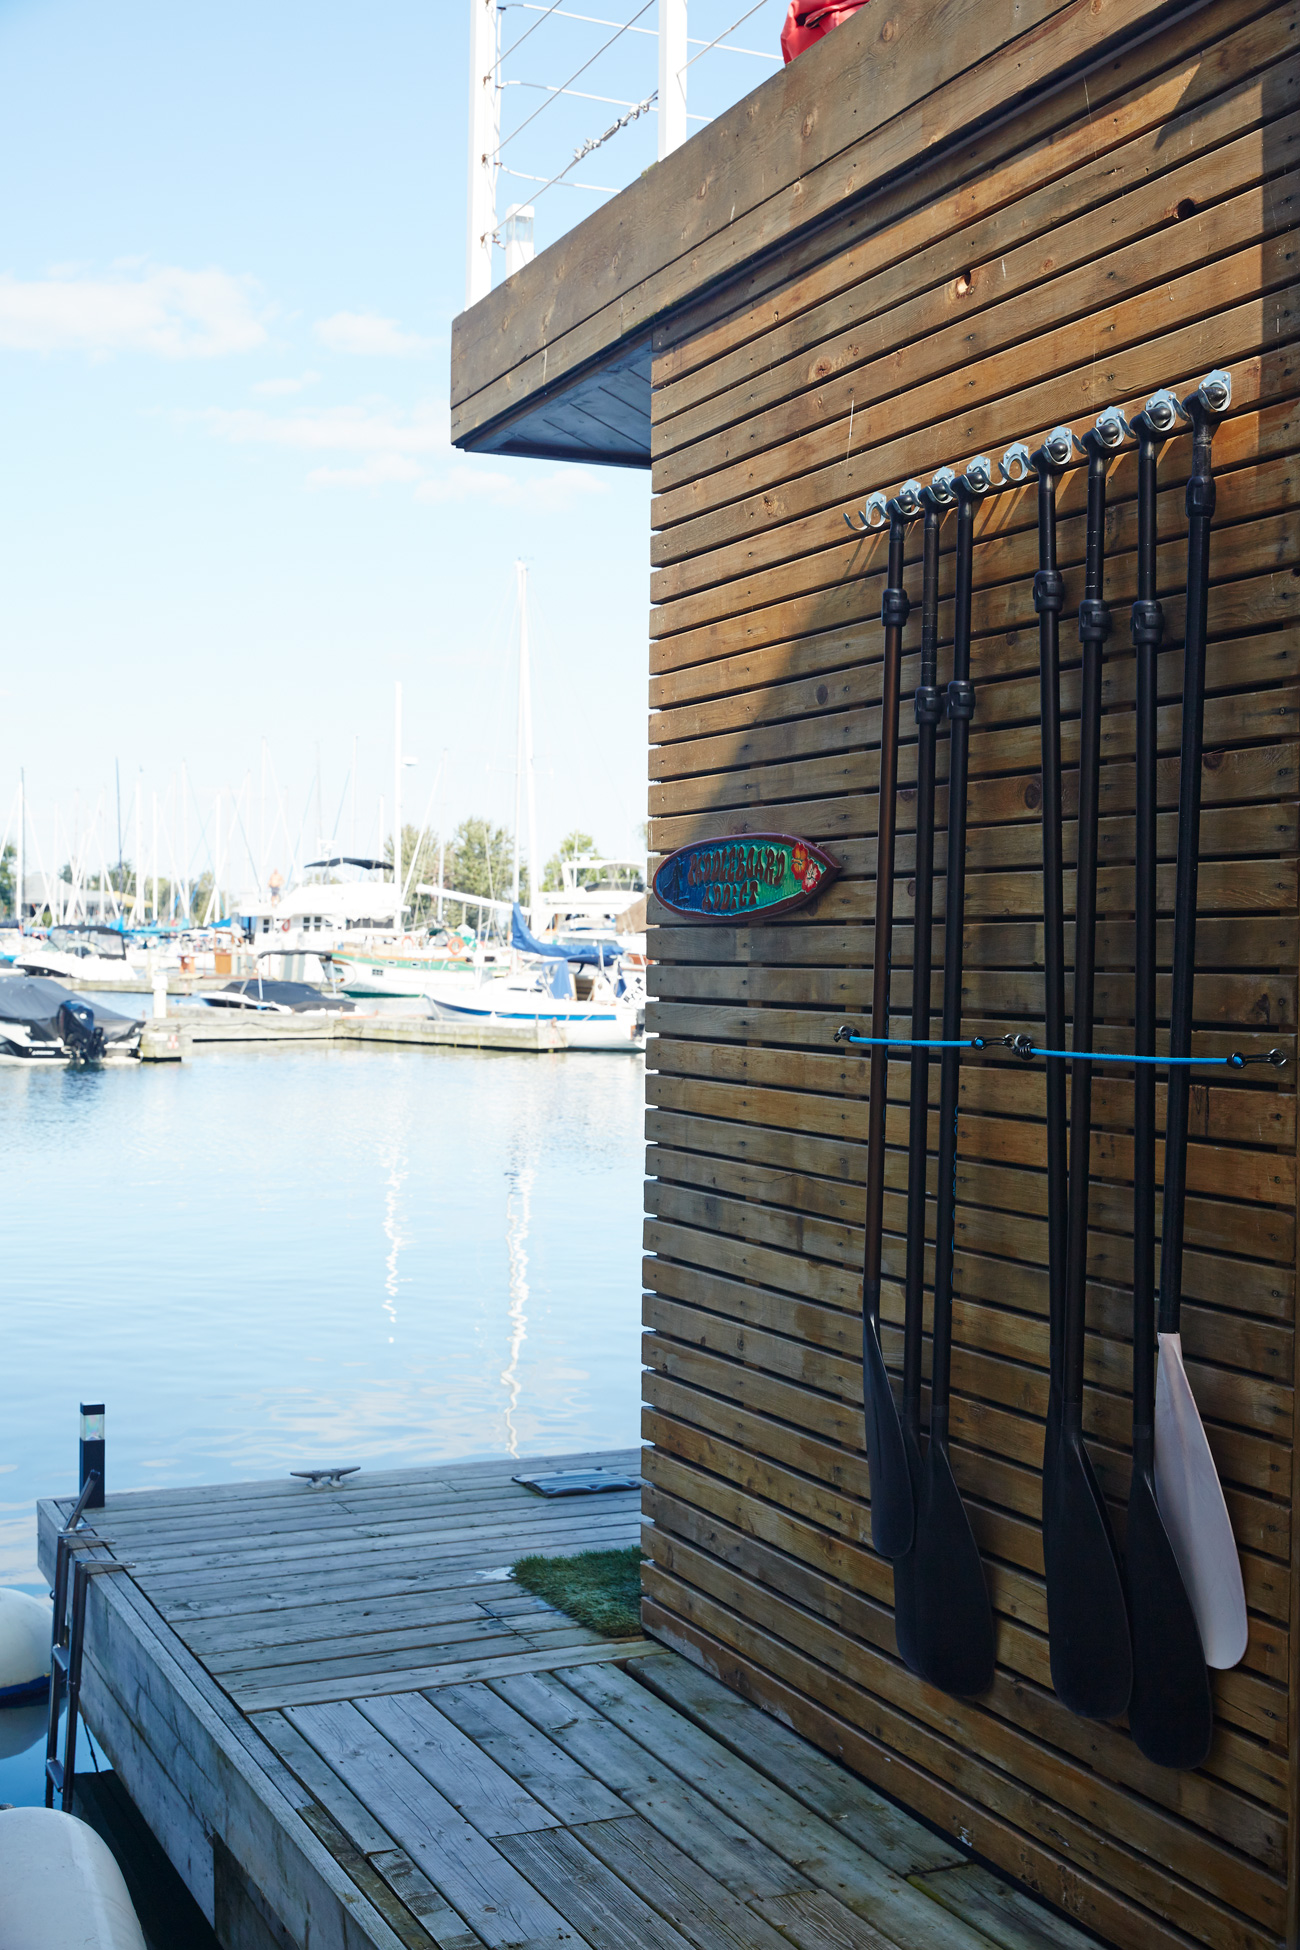 Outside, a cedar-clad wall holds Peic’s paddleboard instruction gear.